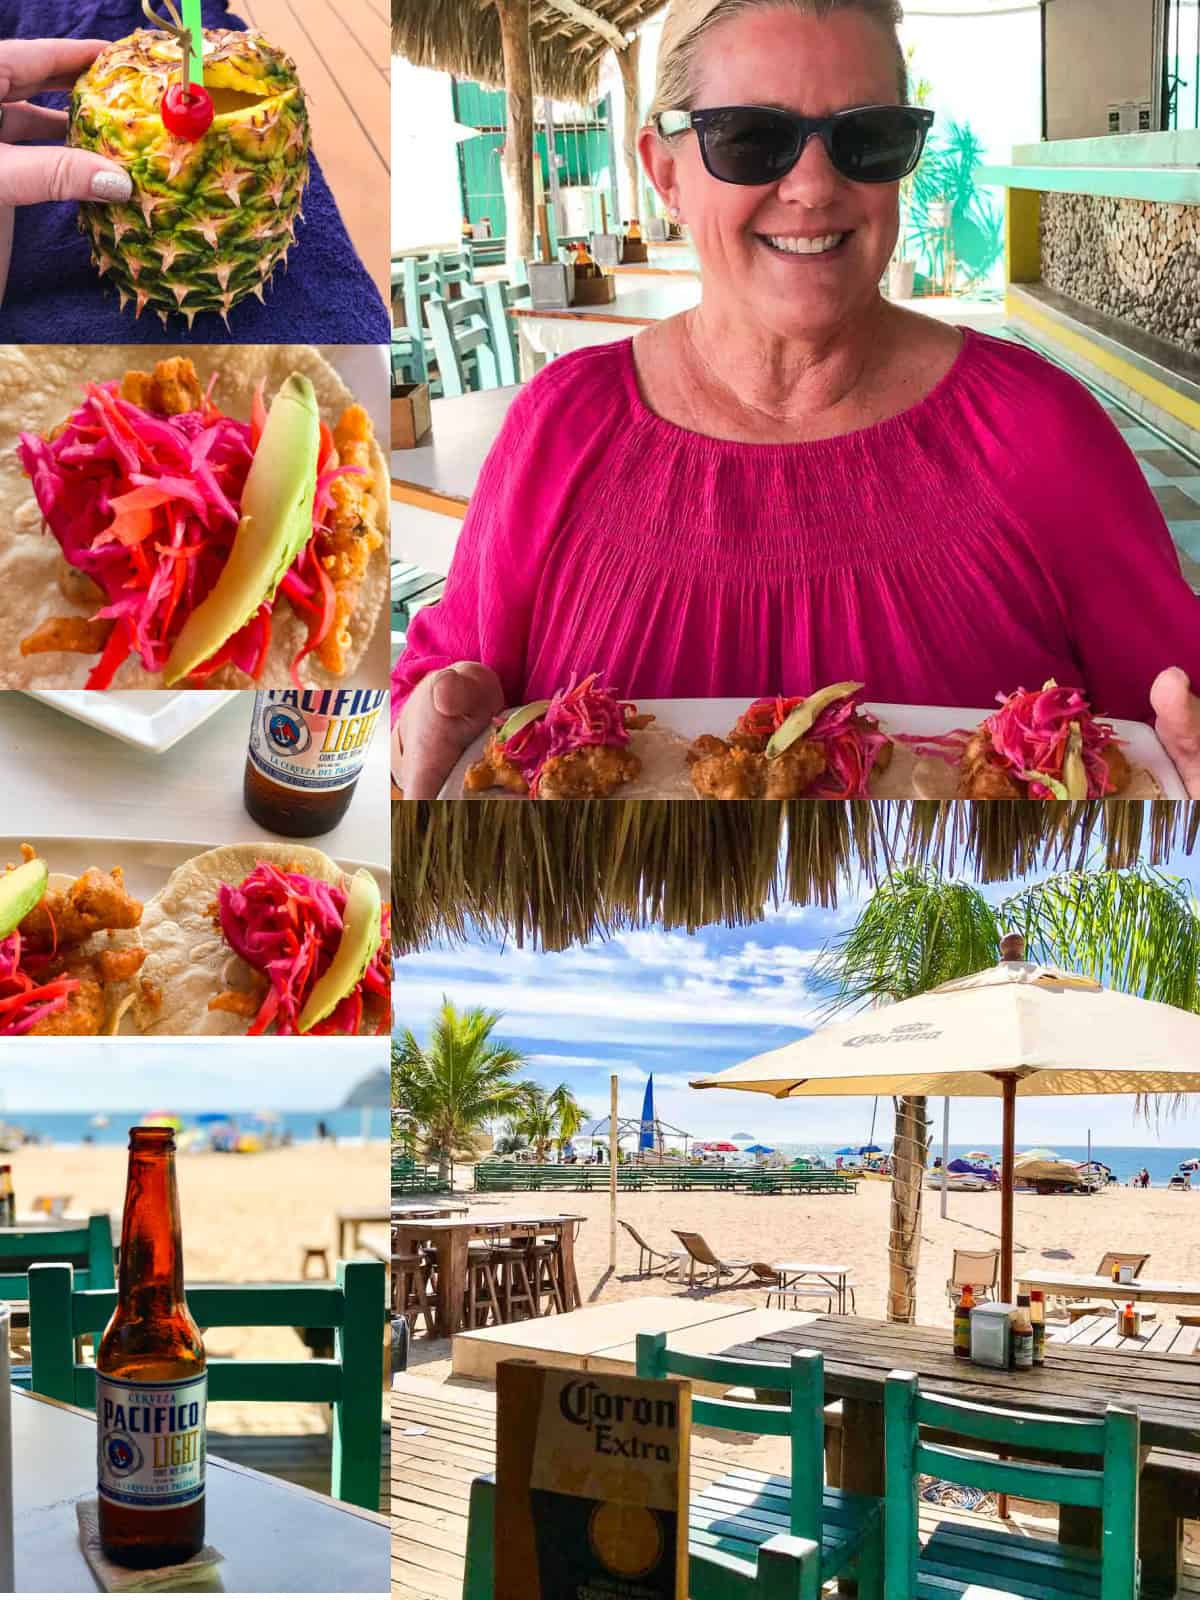 A collage of Mexico with a lady in a pink top eating tacos with a cold beer.